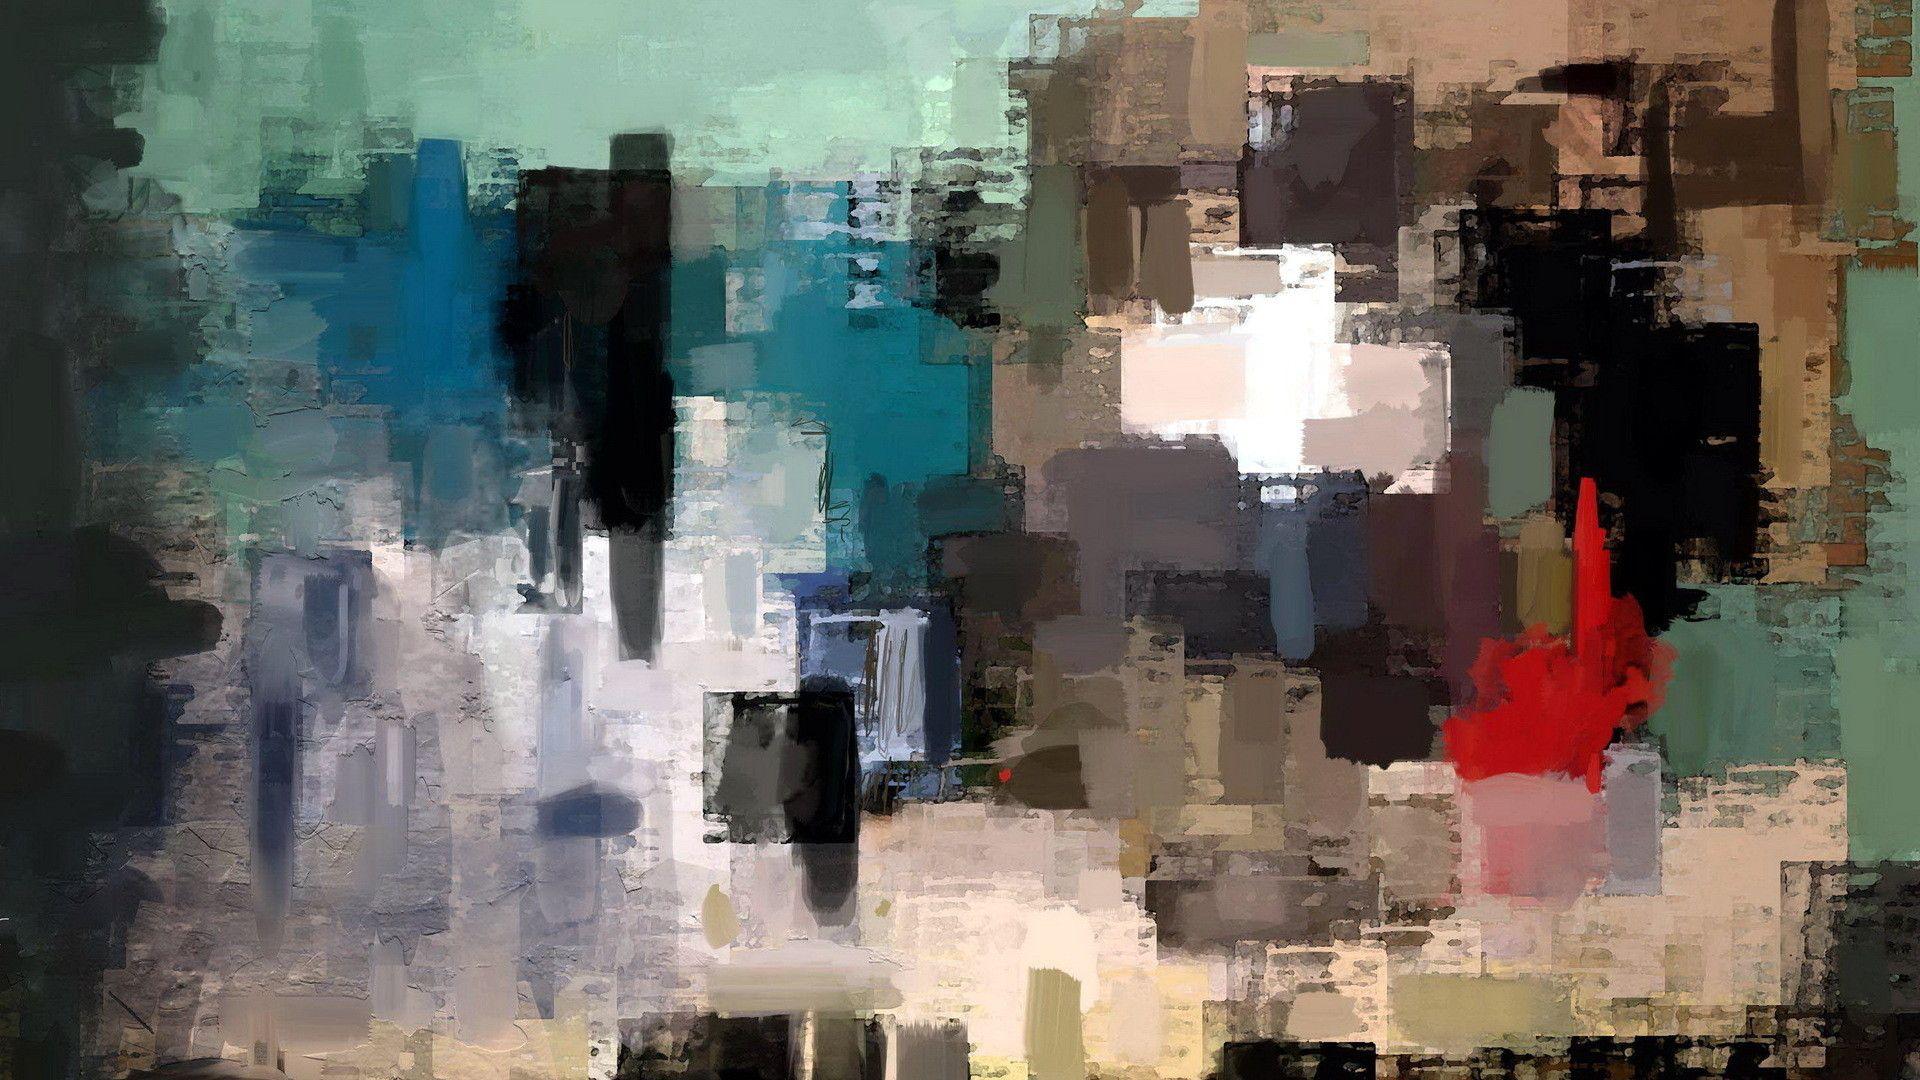 Abstract Painting Wallpaper